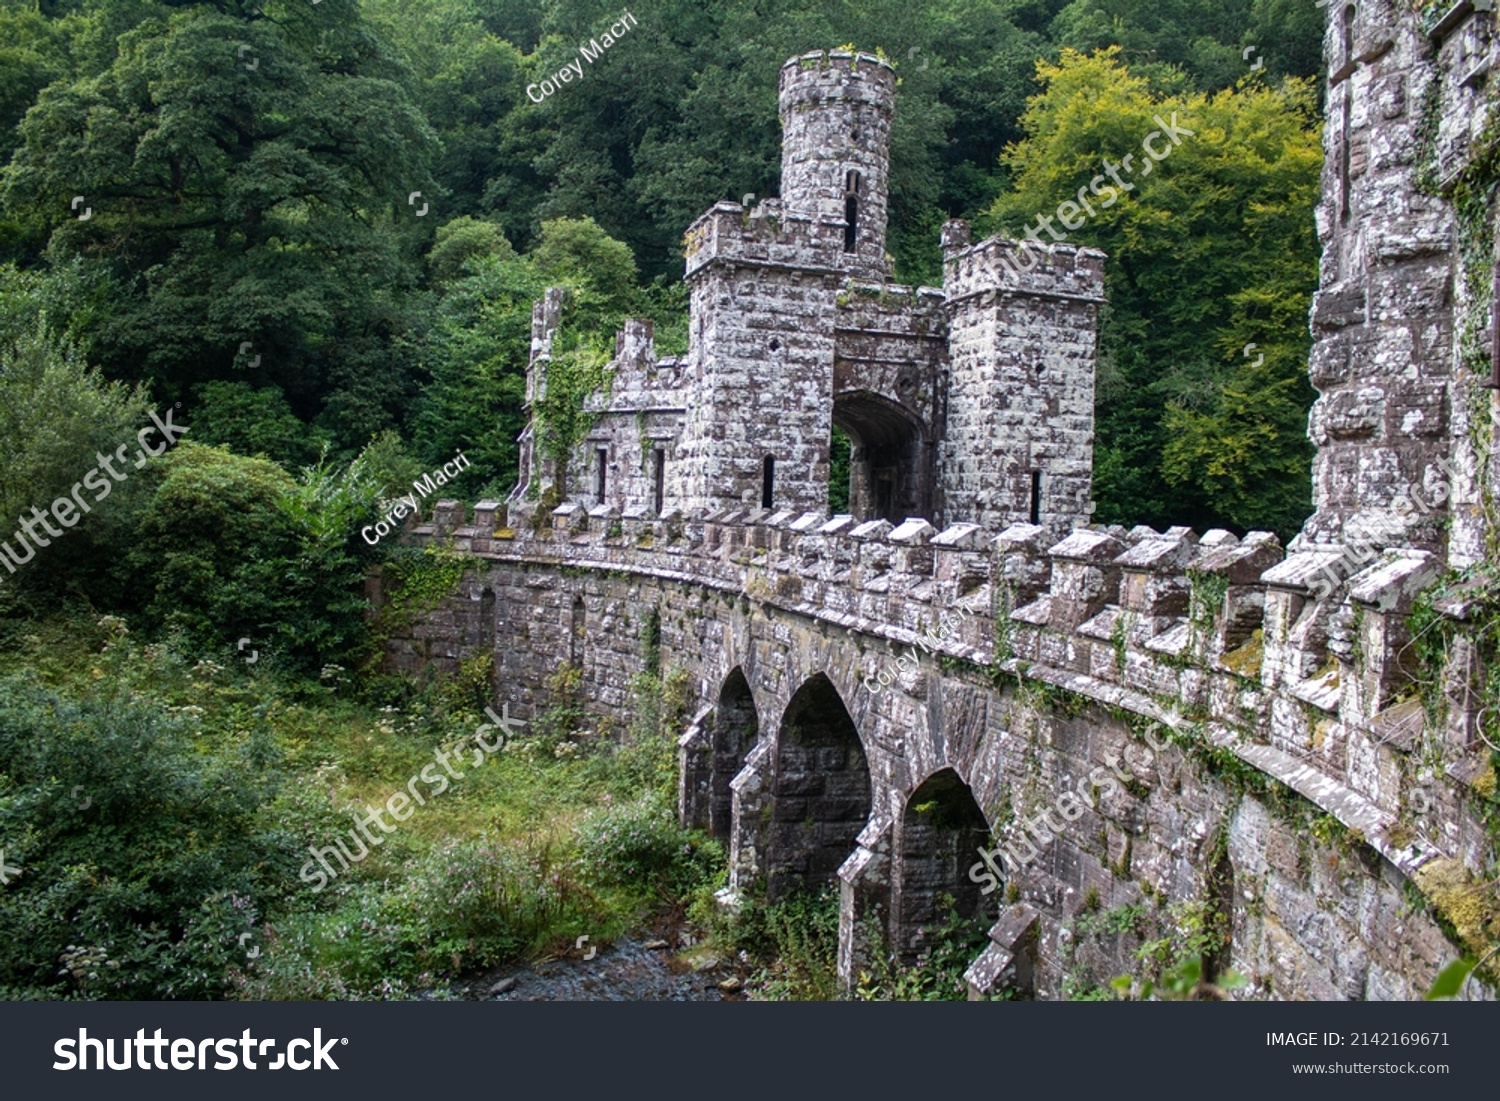  Ballysaggartmore Towers located in County Waterford Ireland. Imposing gothic style buildings situated near Lismore in local woodland walking and picnic areas.  #2142169671